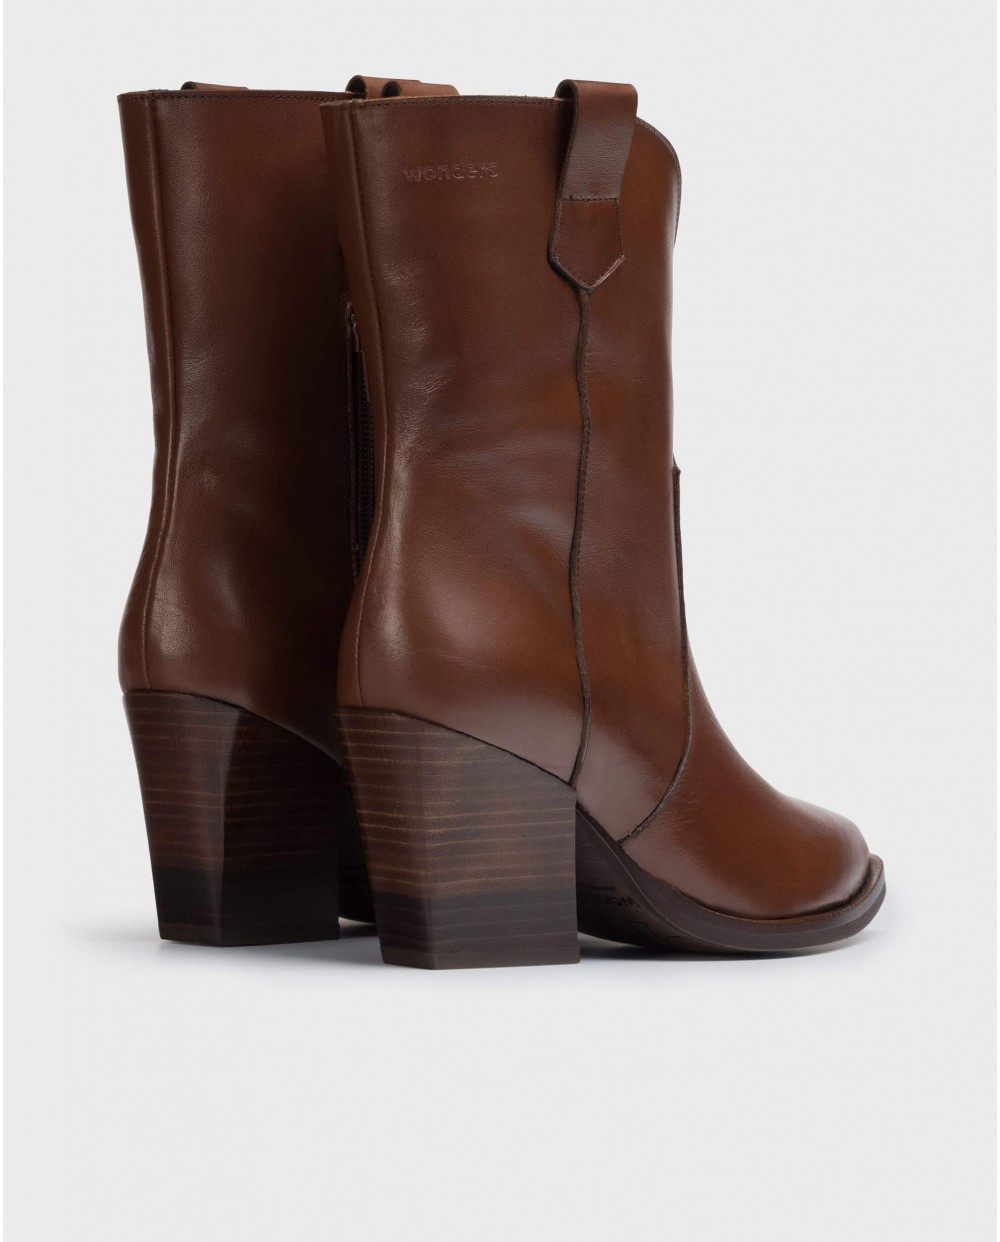 Wonders-Ankle Boots-Brown Paso ankle boot